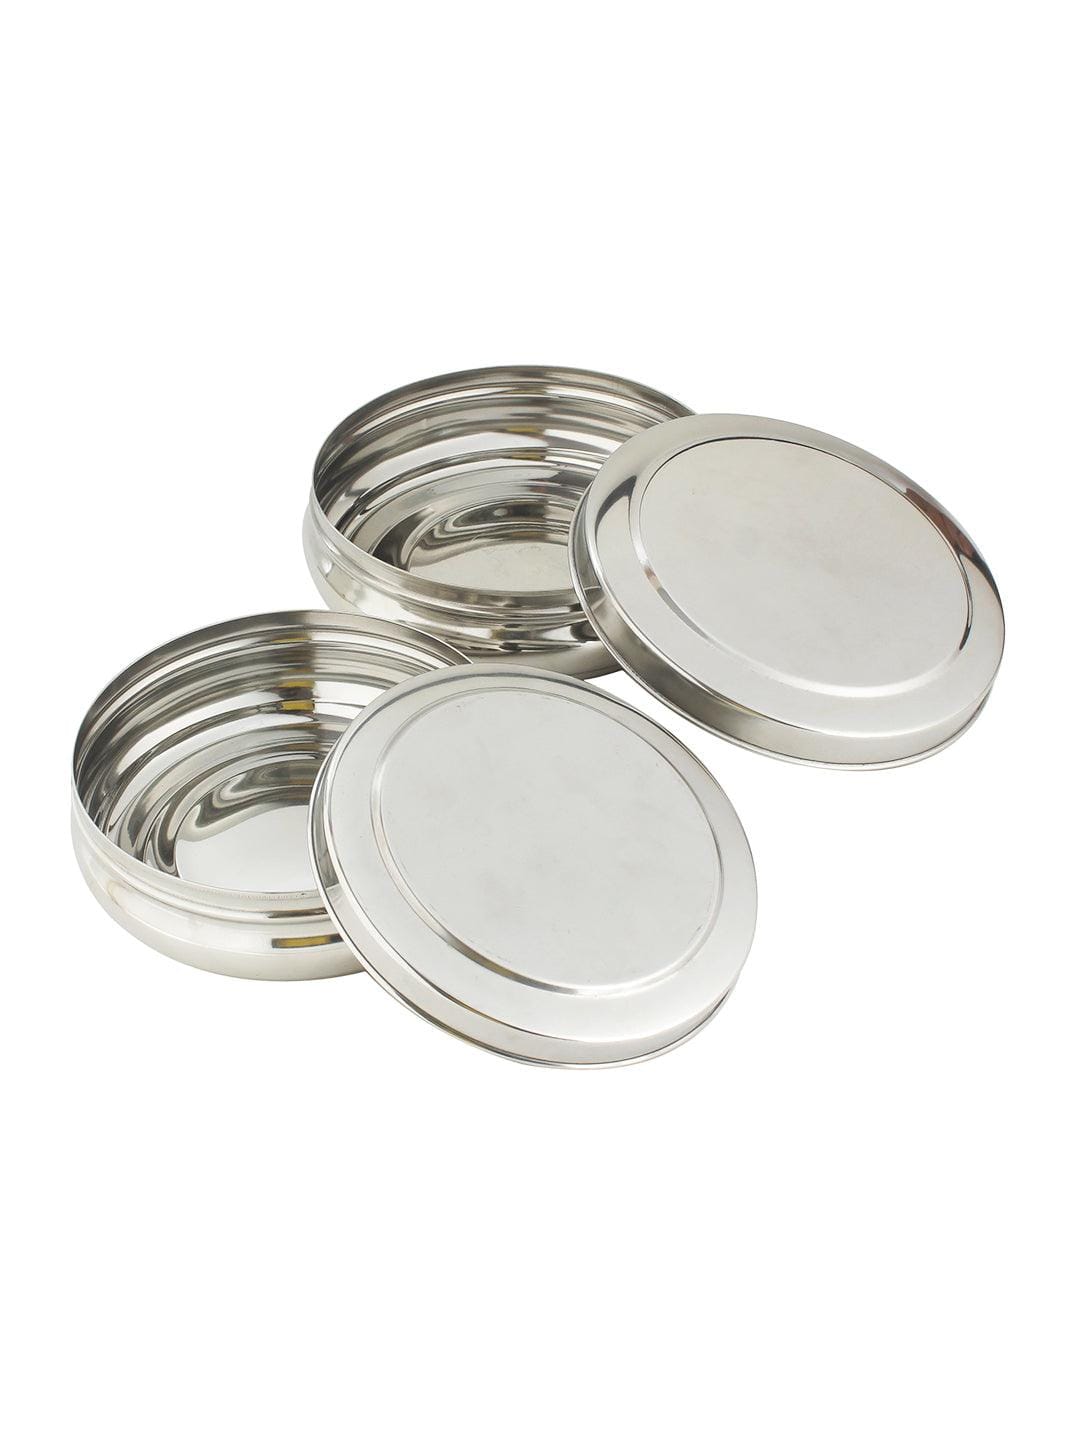 Smartserve Stainless Steel Tomato Dabba, Set of 2 | Food Container